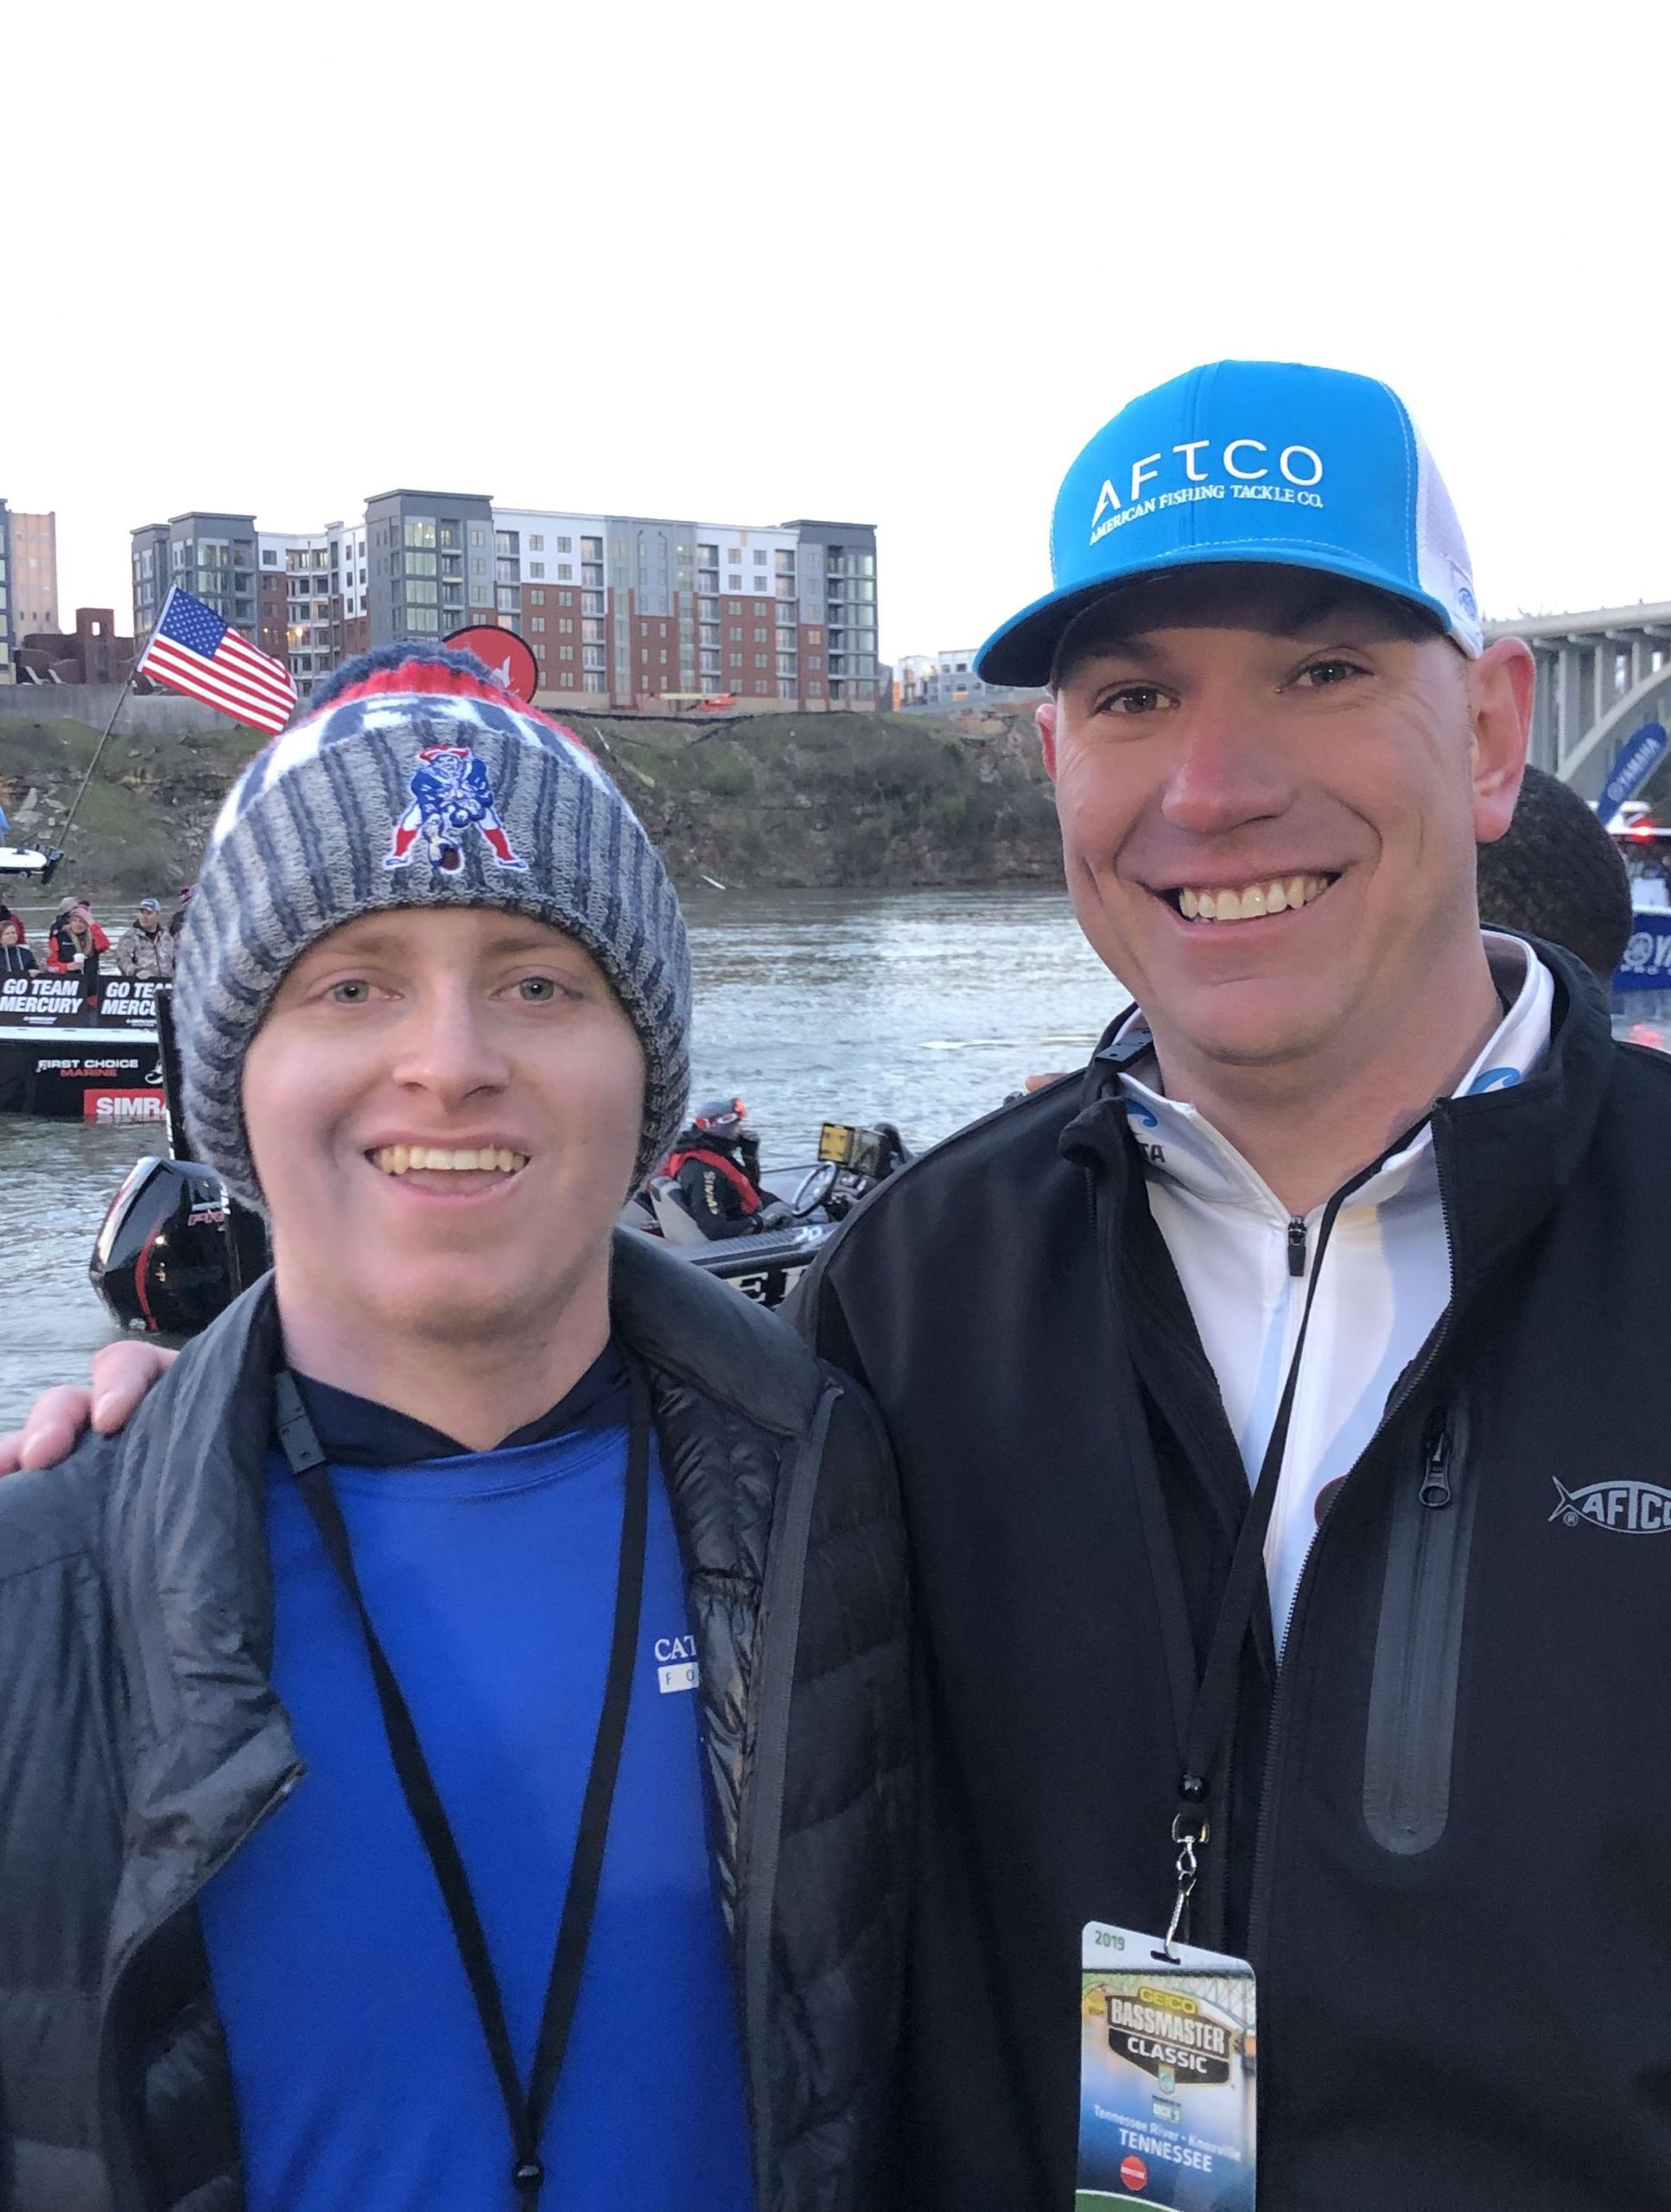 Cook is still struggling with the effects of leukemia, but the great news was he and his family turned in his wheelchair a few weeks before the Classic which is remarkable. He also walked over 10,000 steps at the Classic on Saturday!